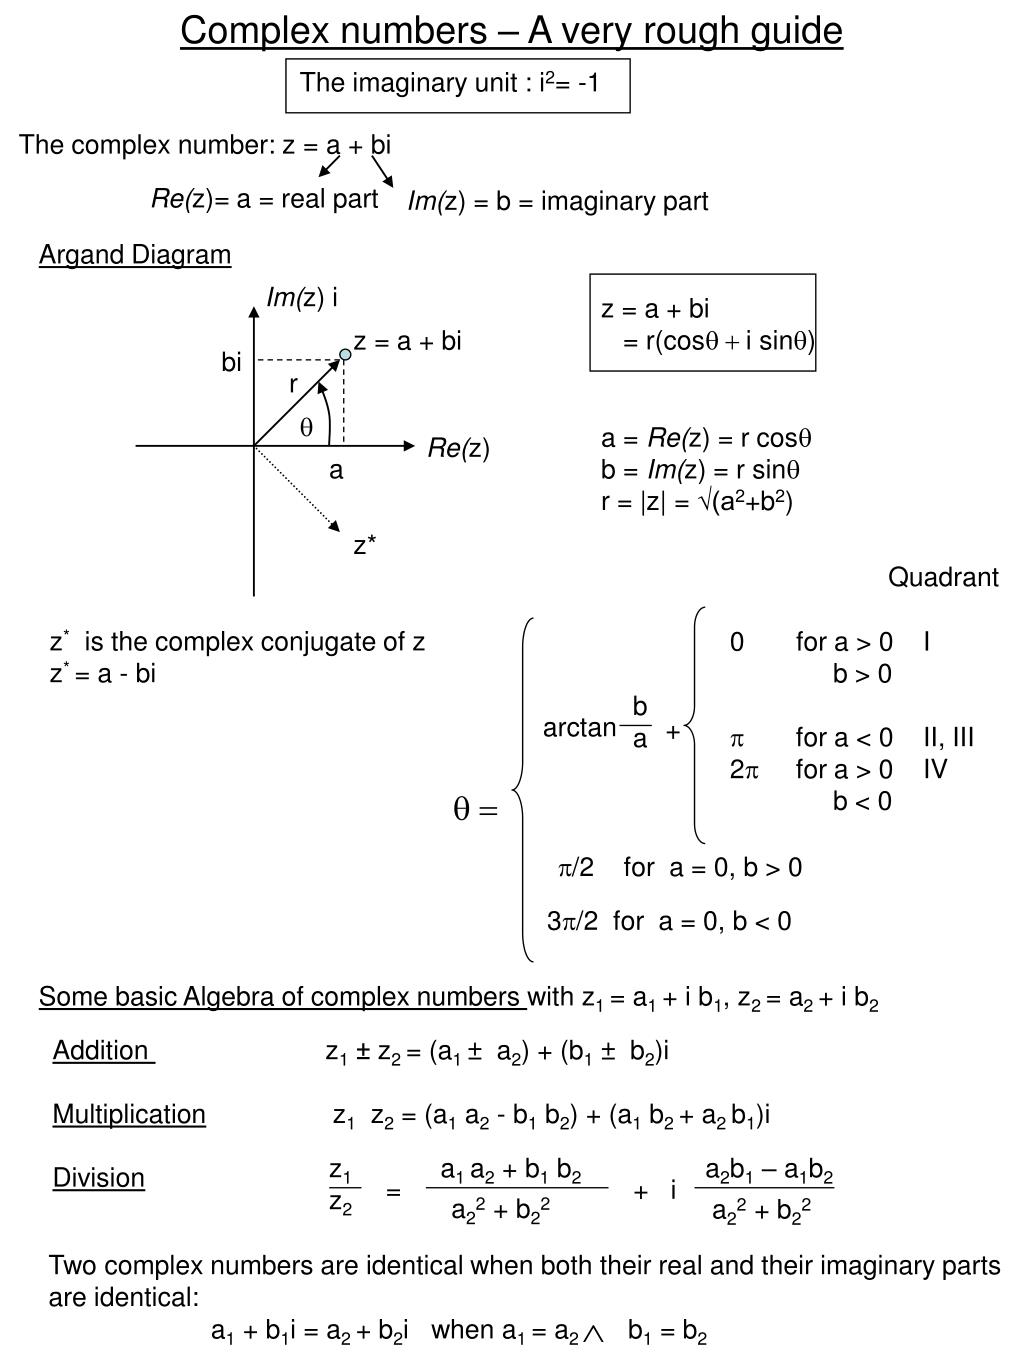 Ppt Complex Numbers A Very Rough Guide Powerpoint Presentation Free Download Id